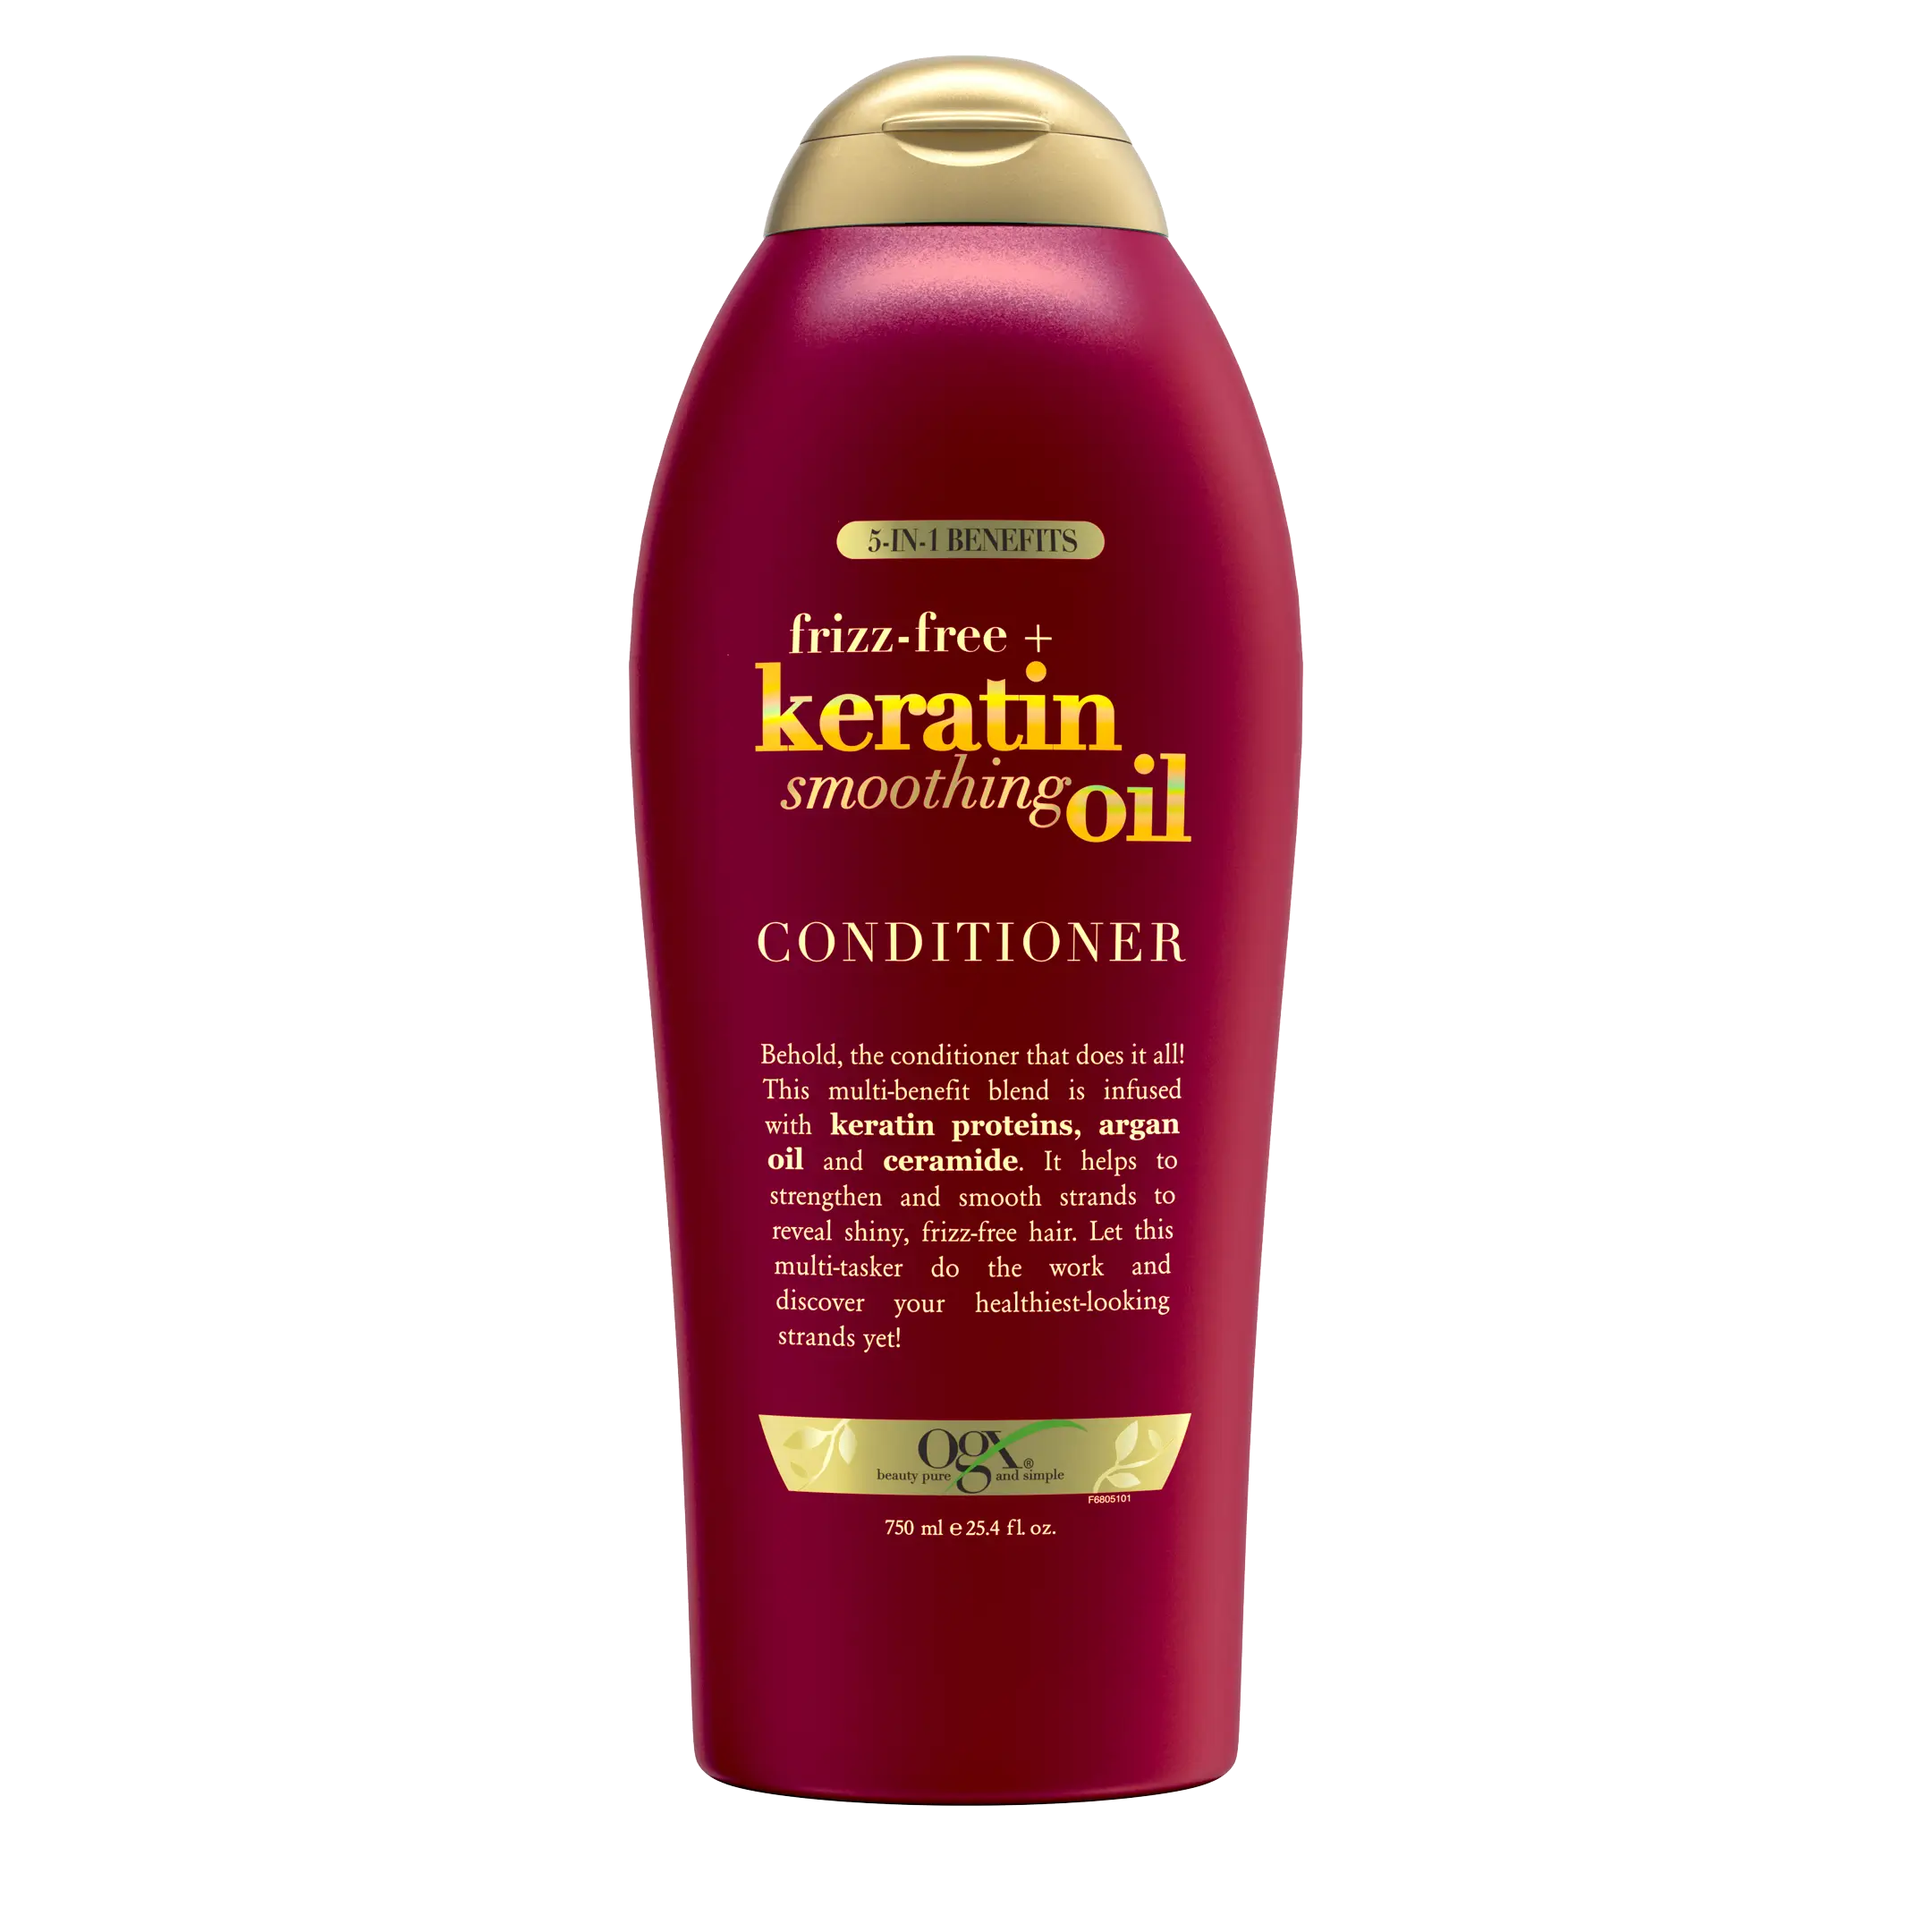 Frizz-Free Keratin Smoothing Oil Conditioner for Frizzy Hair 25.4 fl oz